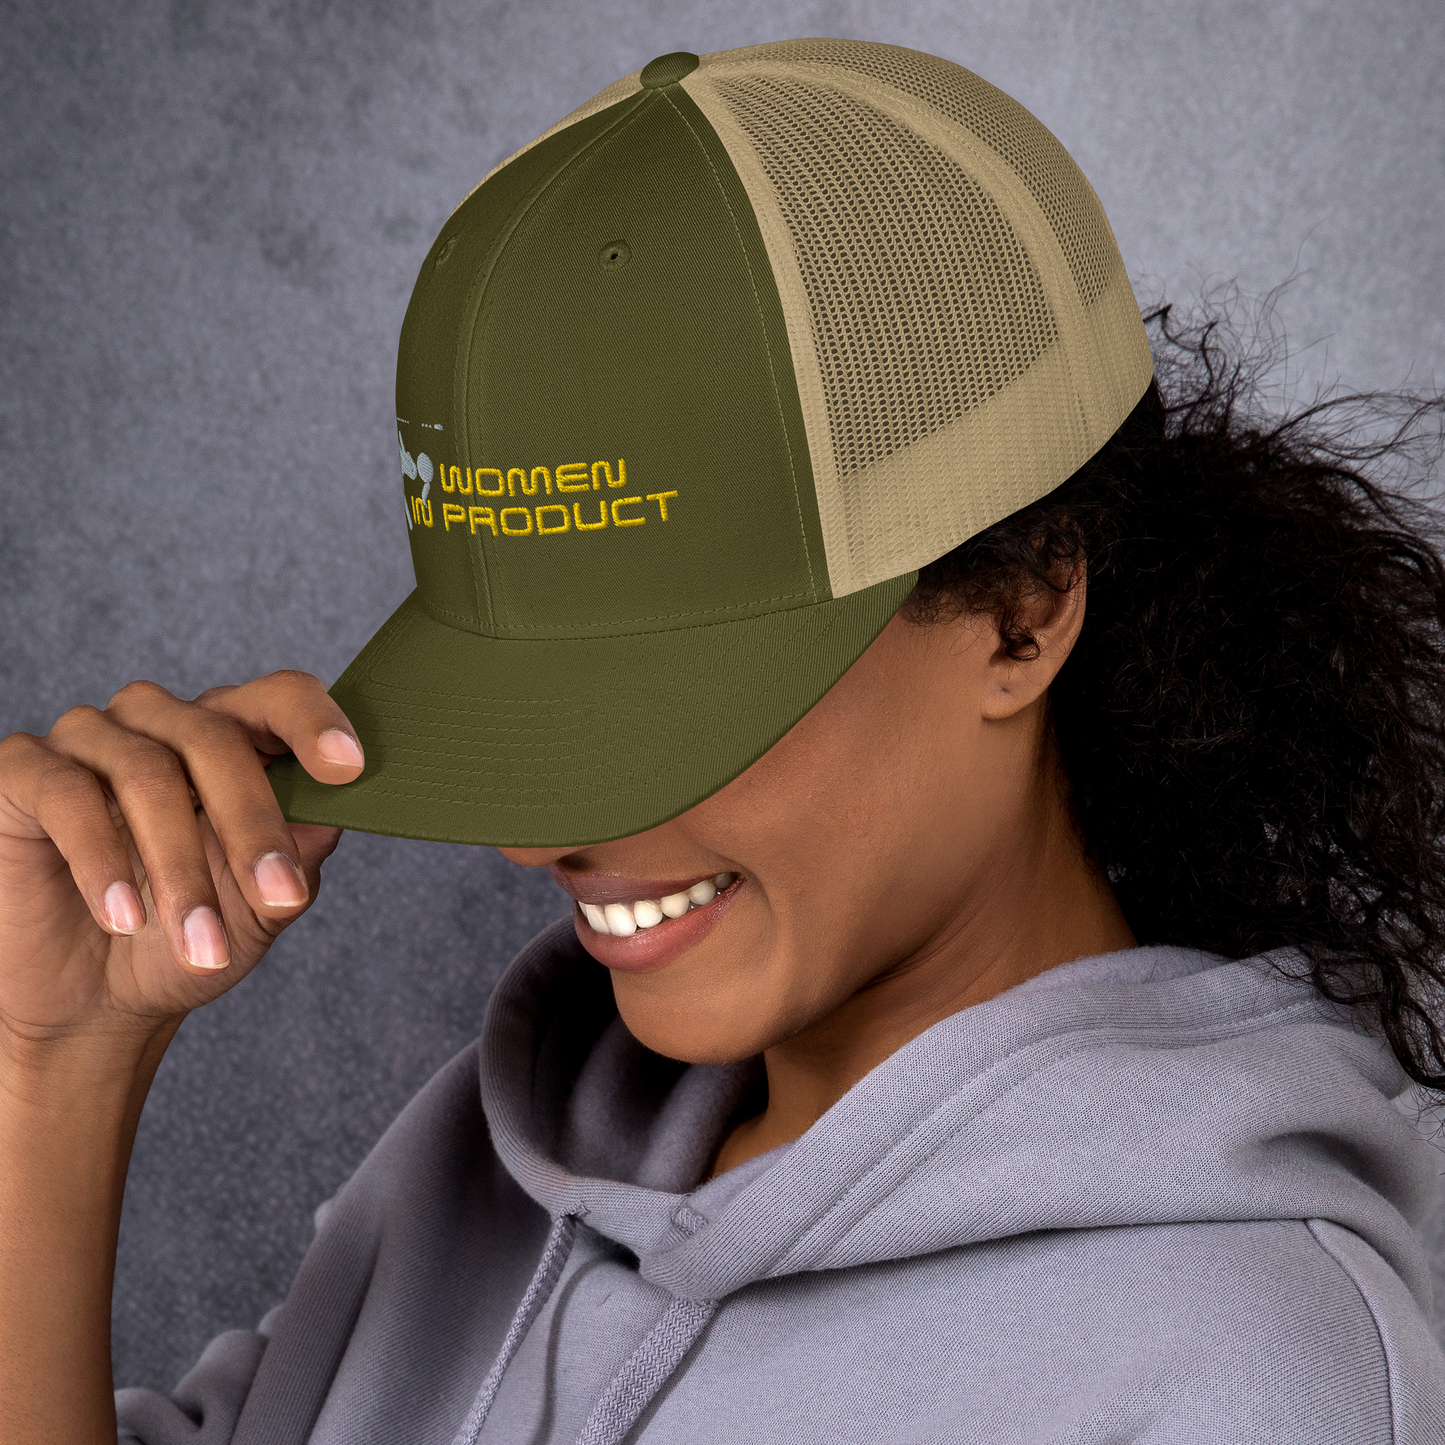 Women in Product Cap 1 (click for colors)